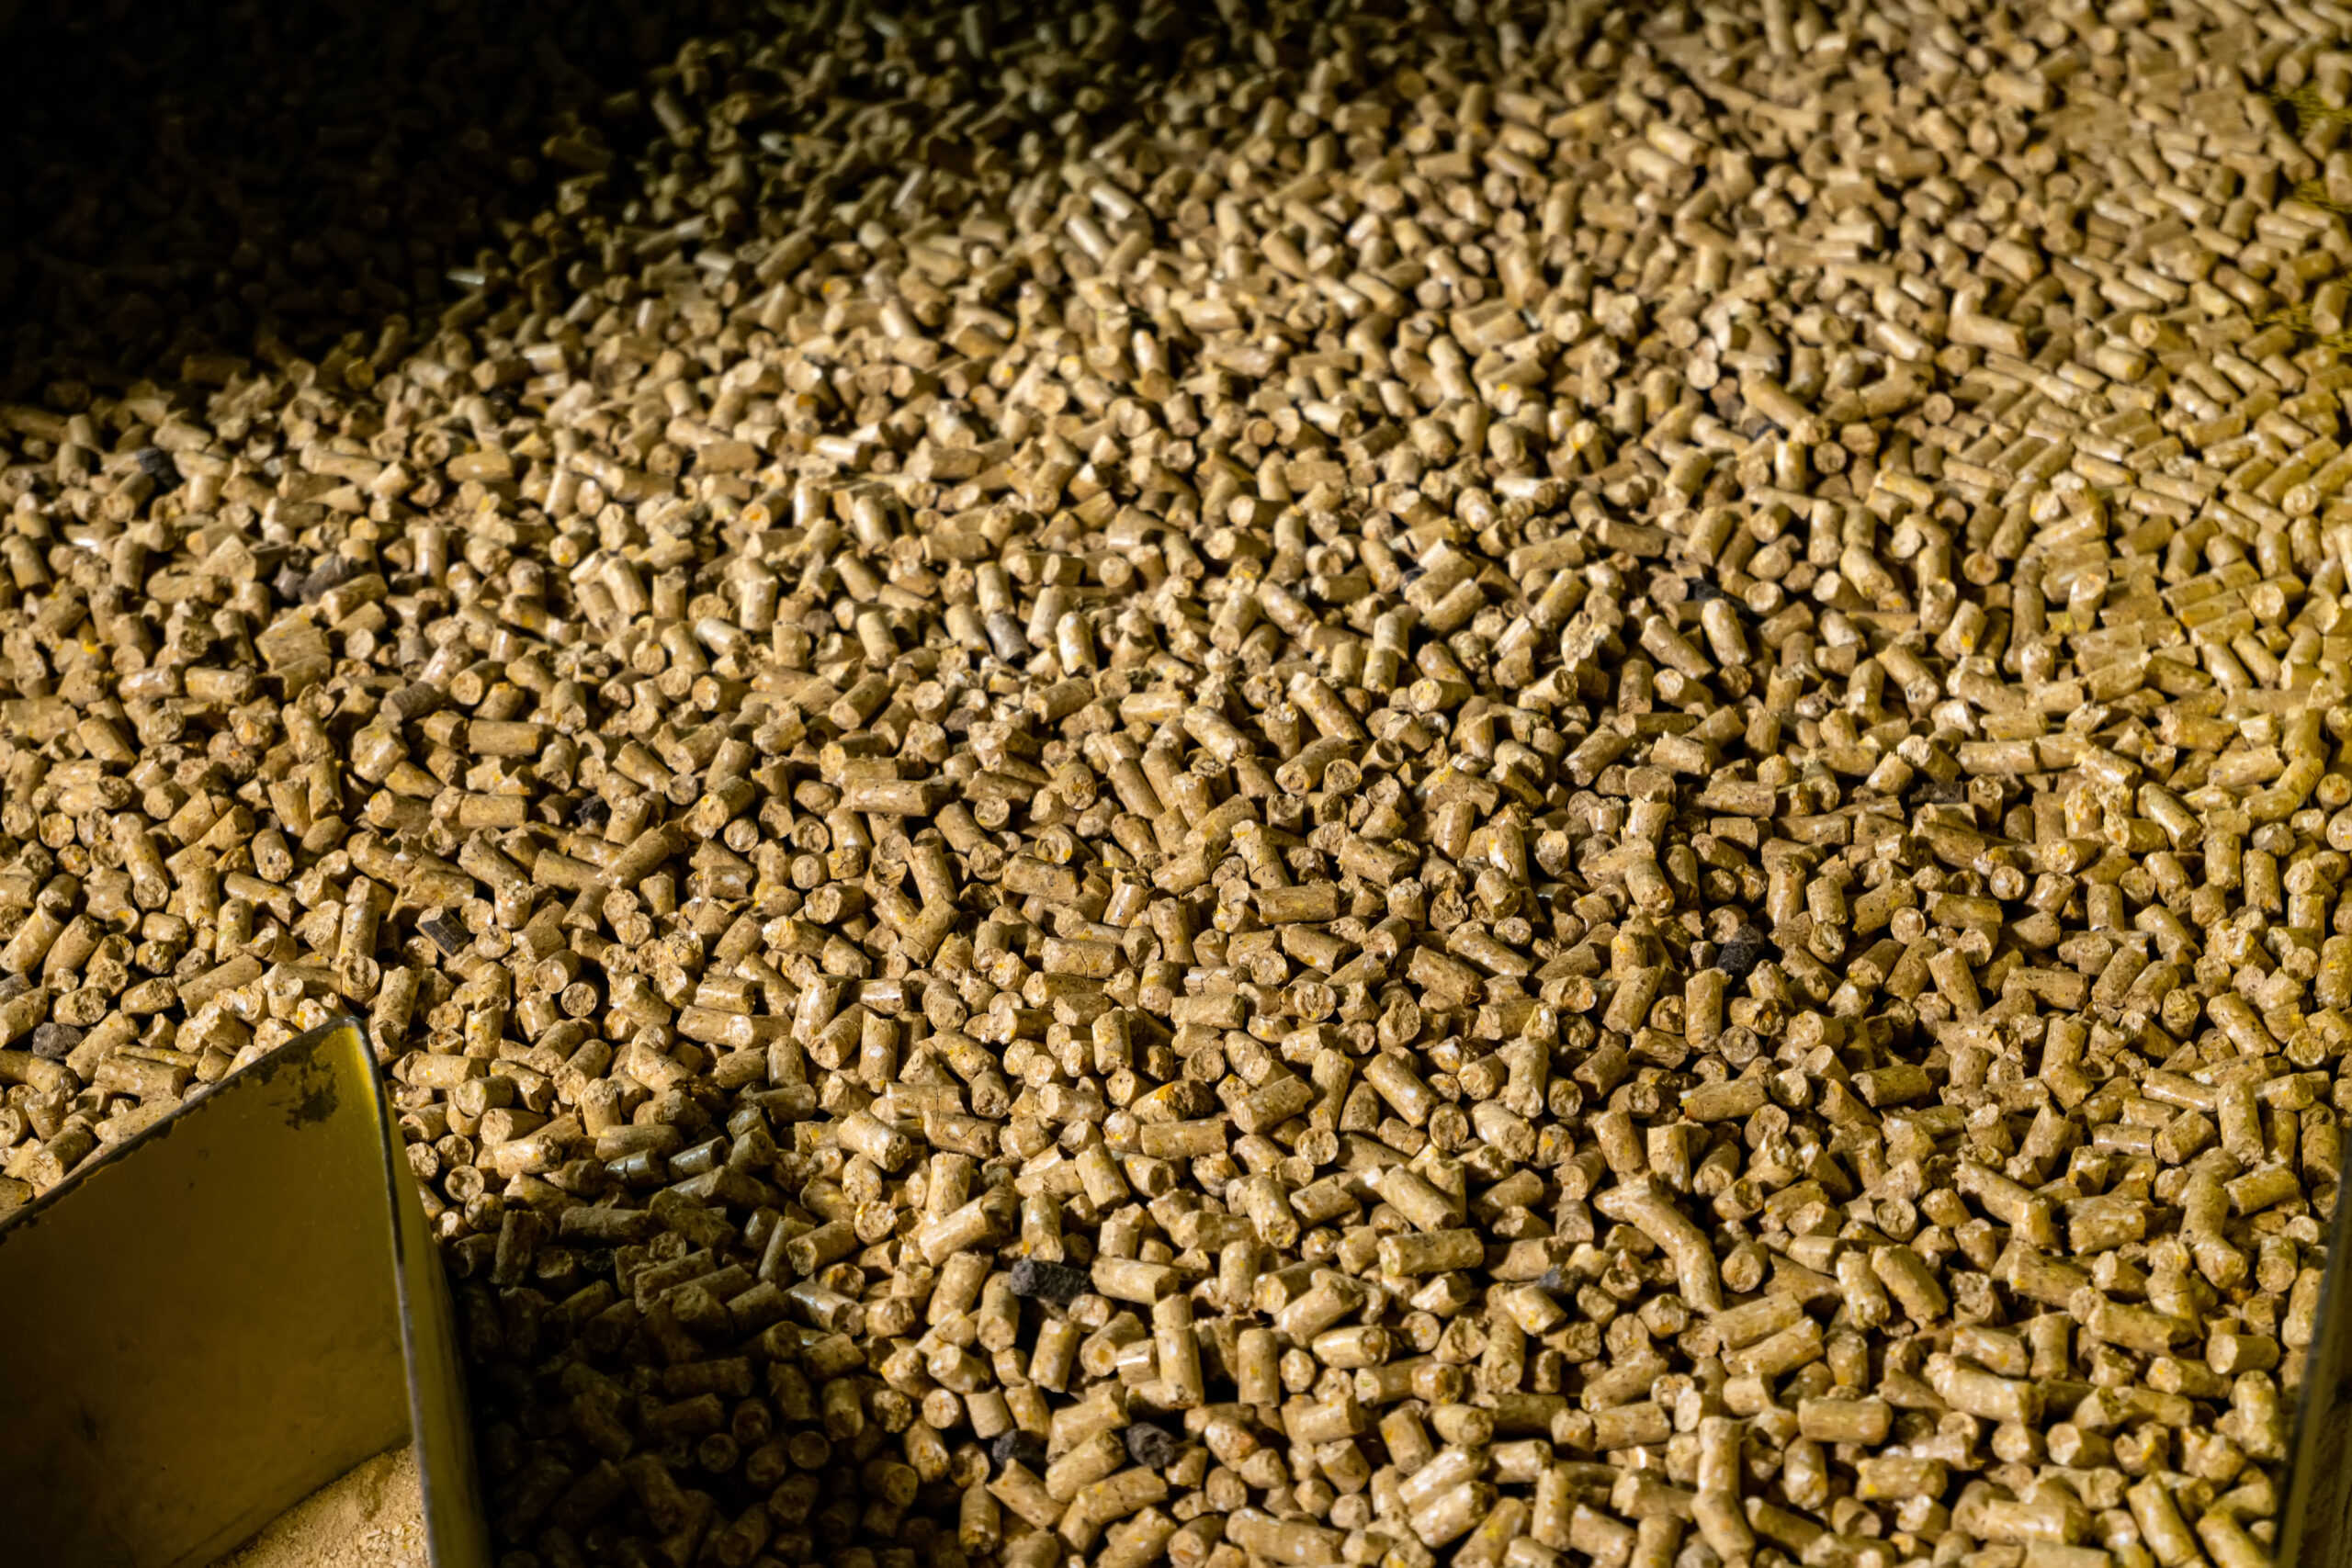 Production of combined pelleted animal feed from organic ingredients.